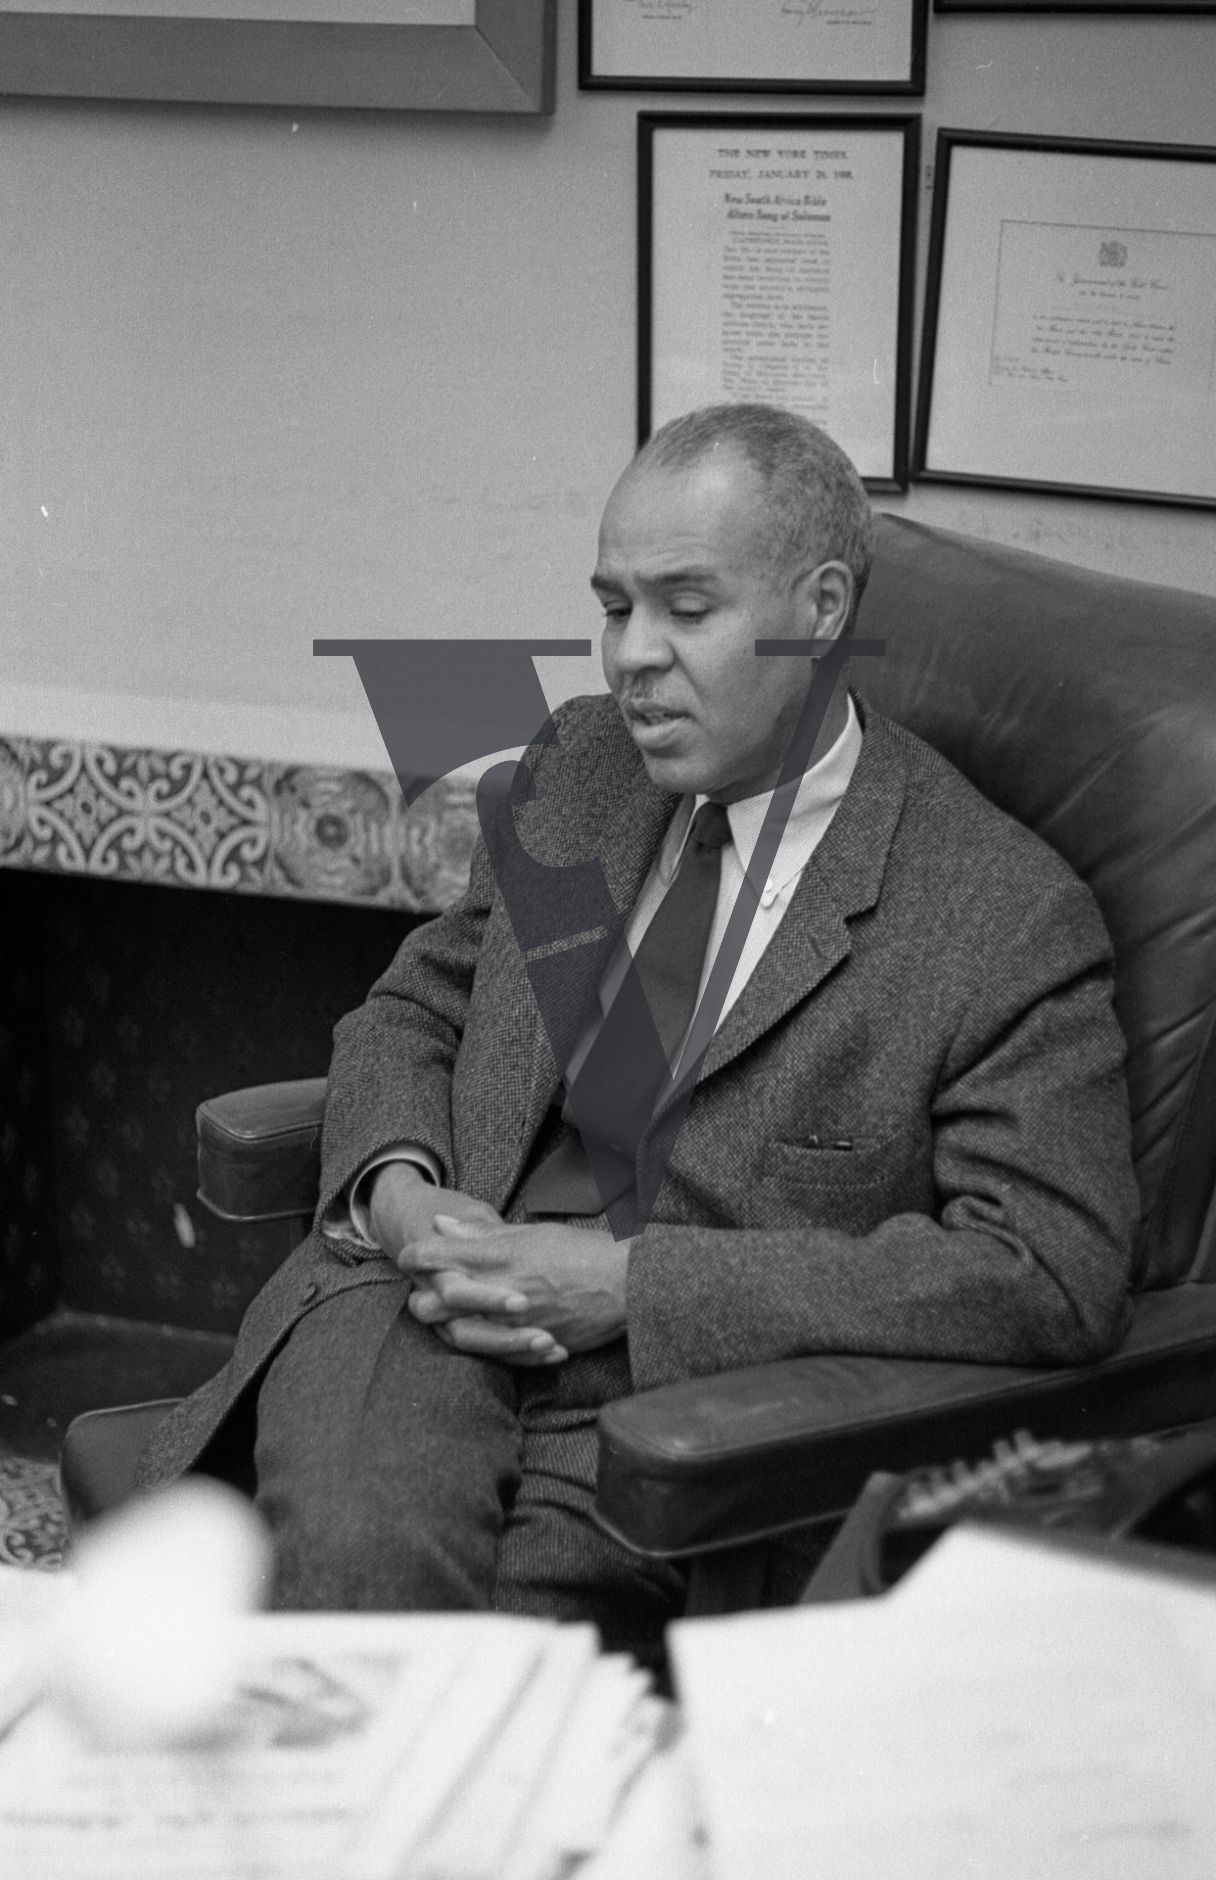 Roy Wilkins, leader, National Association for the Advancement of Colored People, NAACP, portrait, hands-clasped.